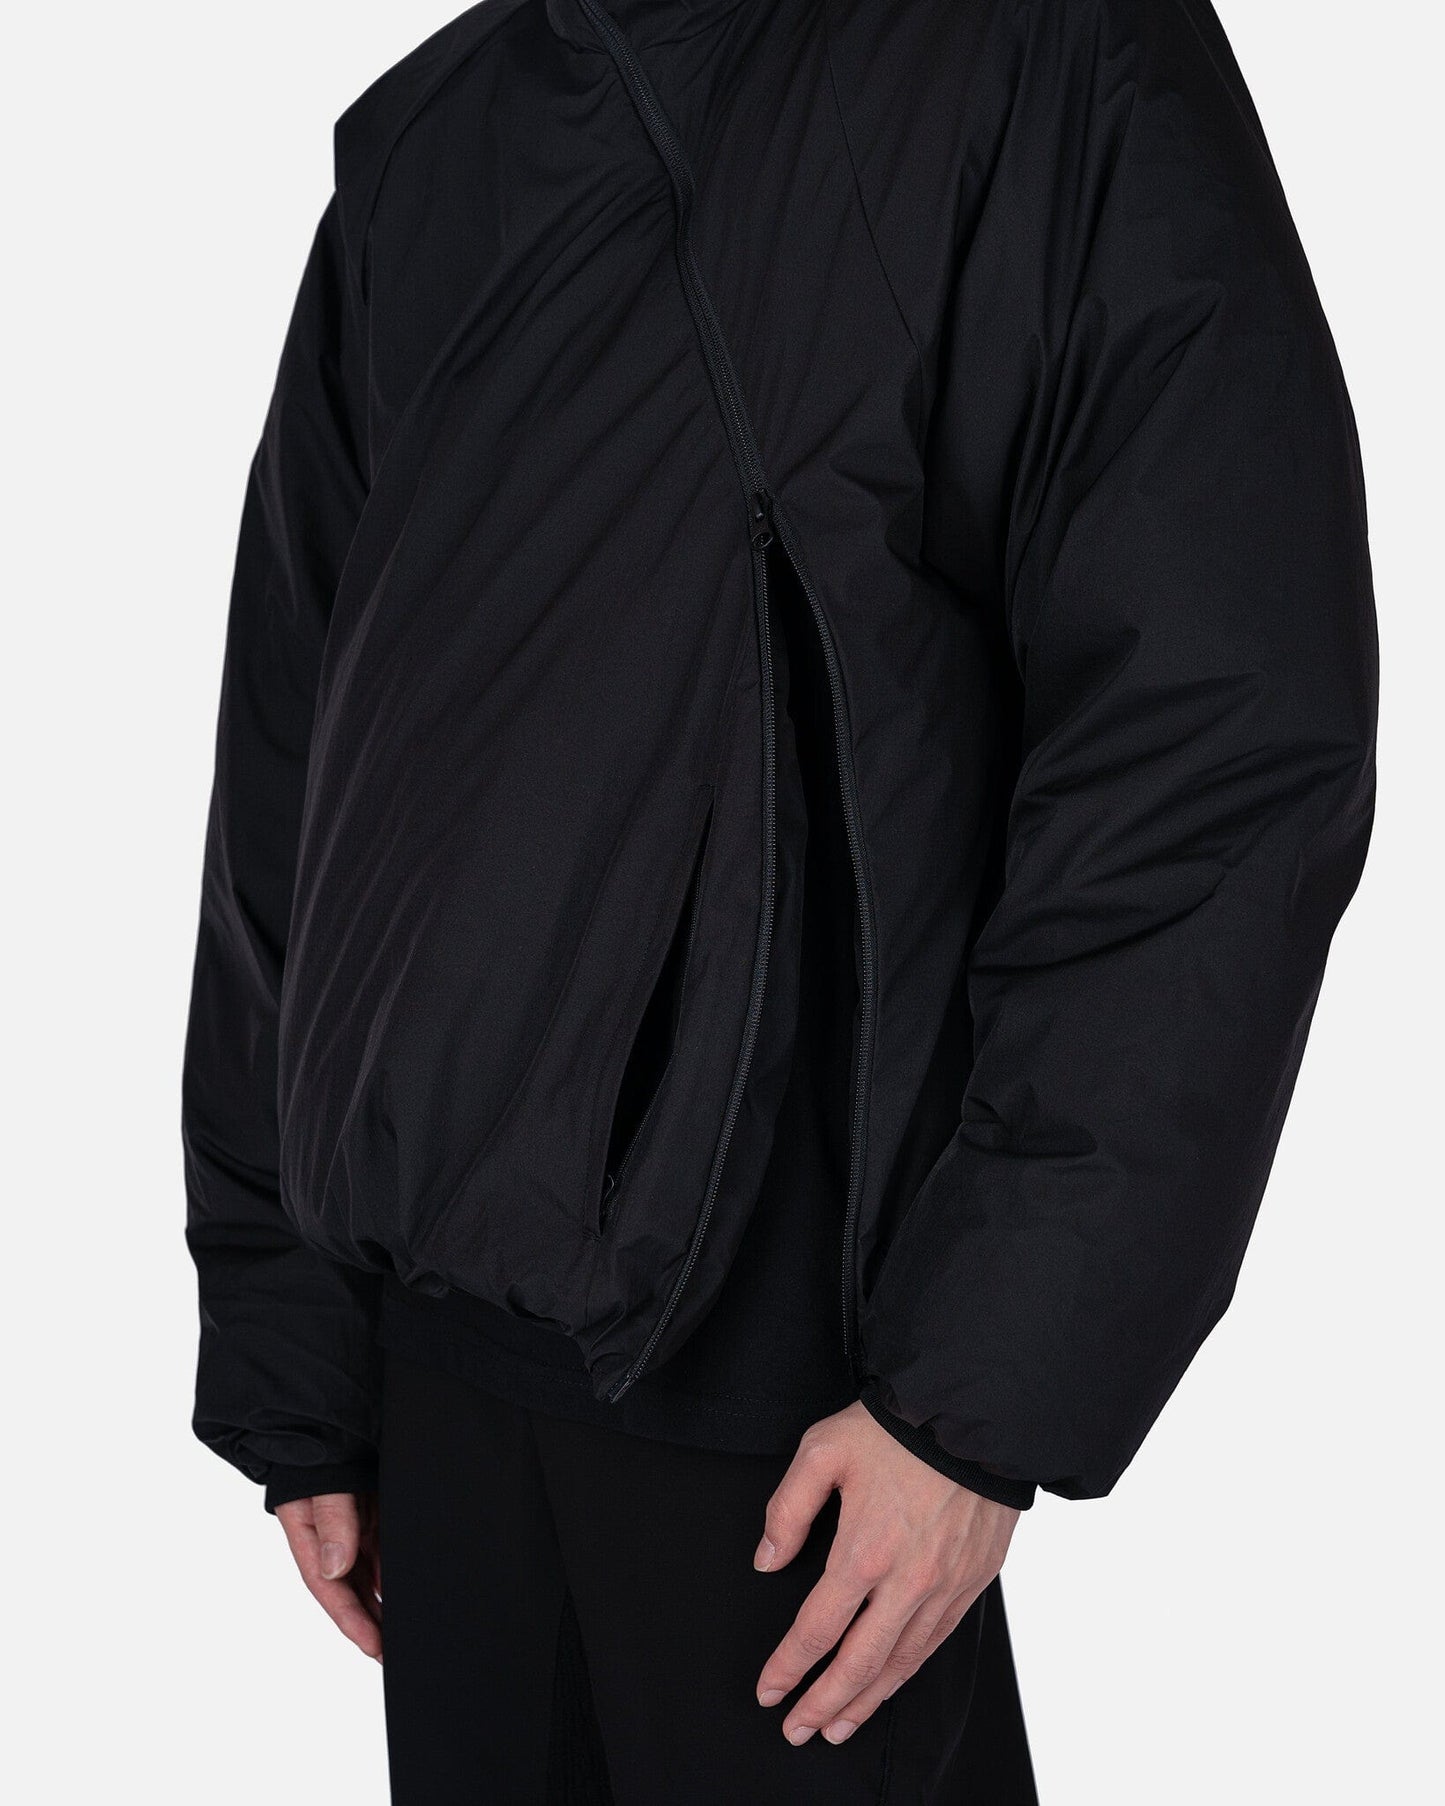 POST ARCHIVE FACTION (P.A.F) Men's Jackets 5.0 Down Center in Black